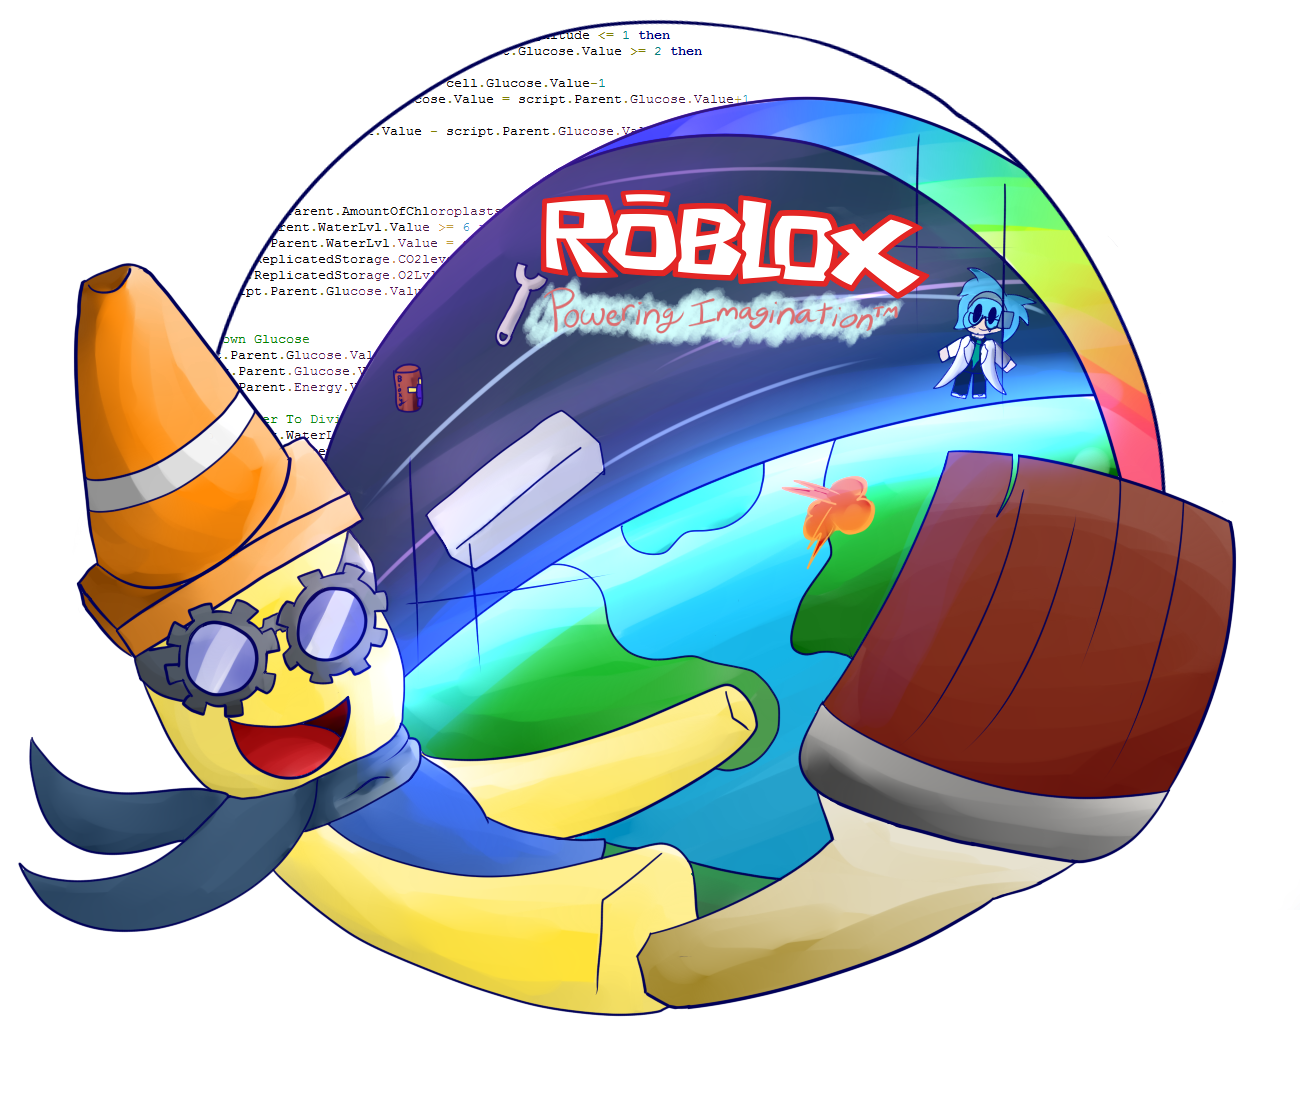 Announcing The Finalists For The Roblox T Shirt Design Contest Roblox Blog - the noob poking a bomb with a stick roblox t shirt shirt